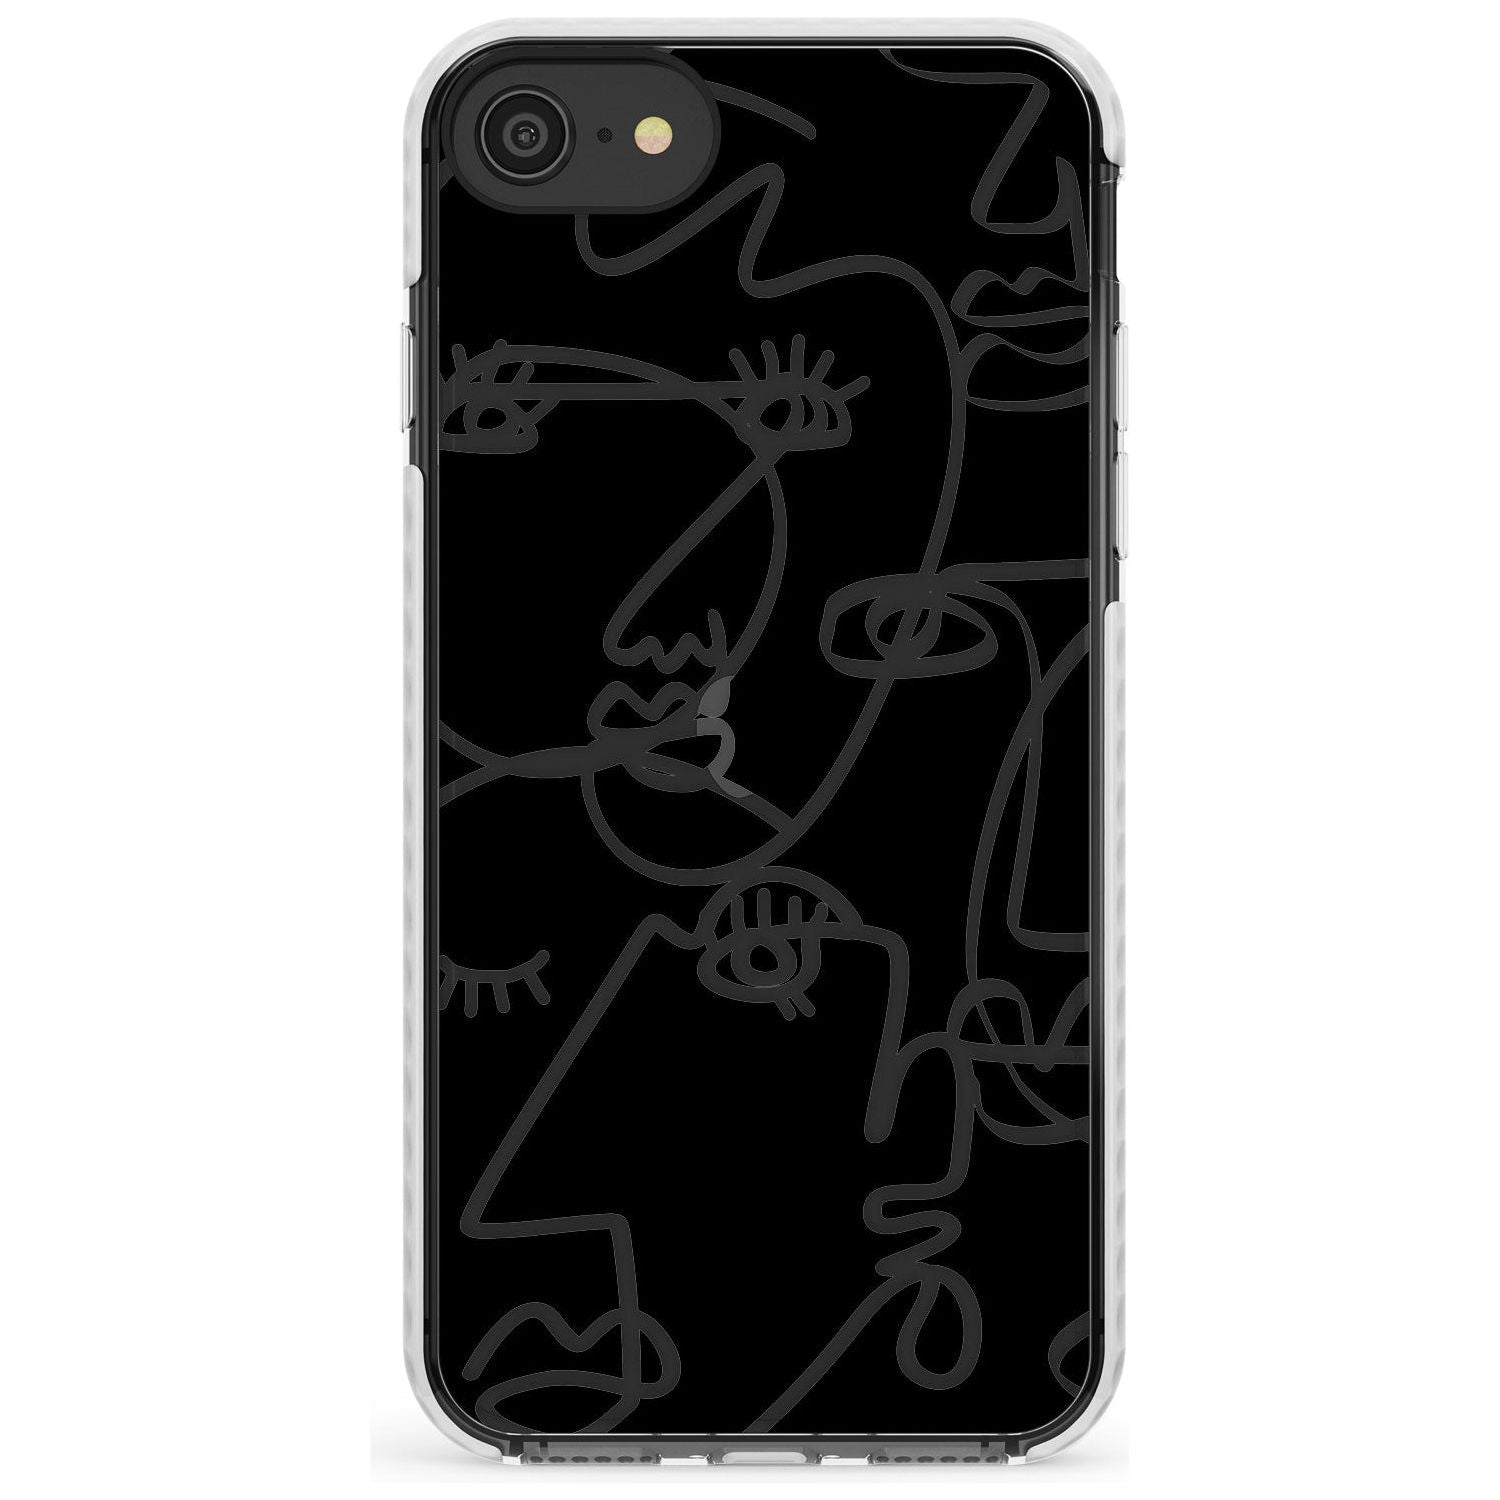 Continuous Line Faces: Clear on Black Slim TPU Phone Case for iPhone SE 8 7 Plus